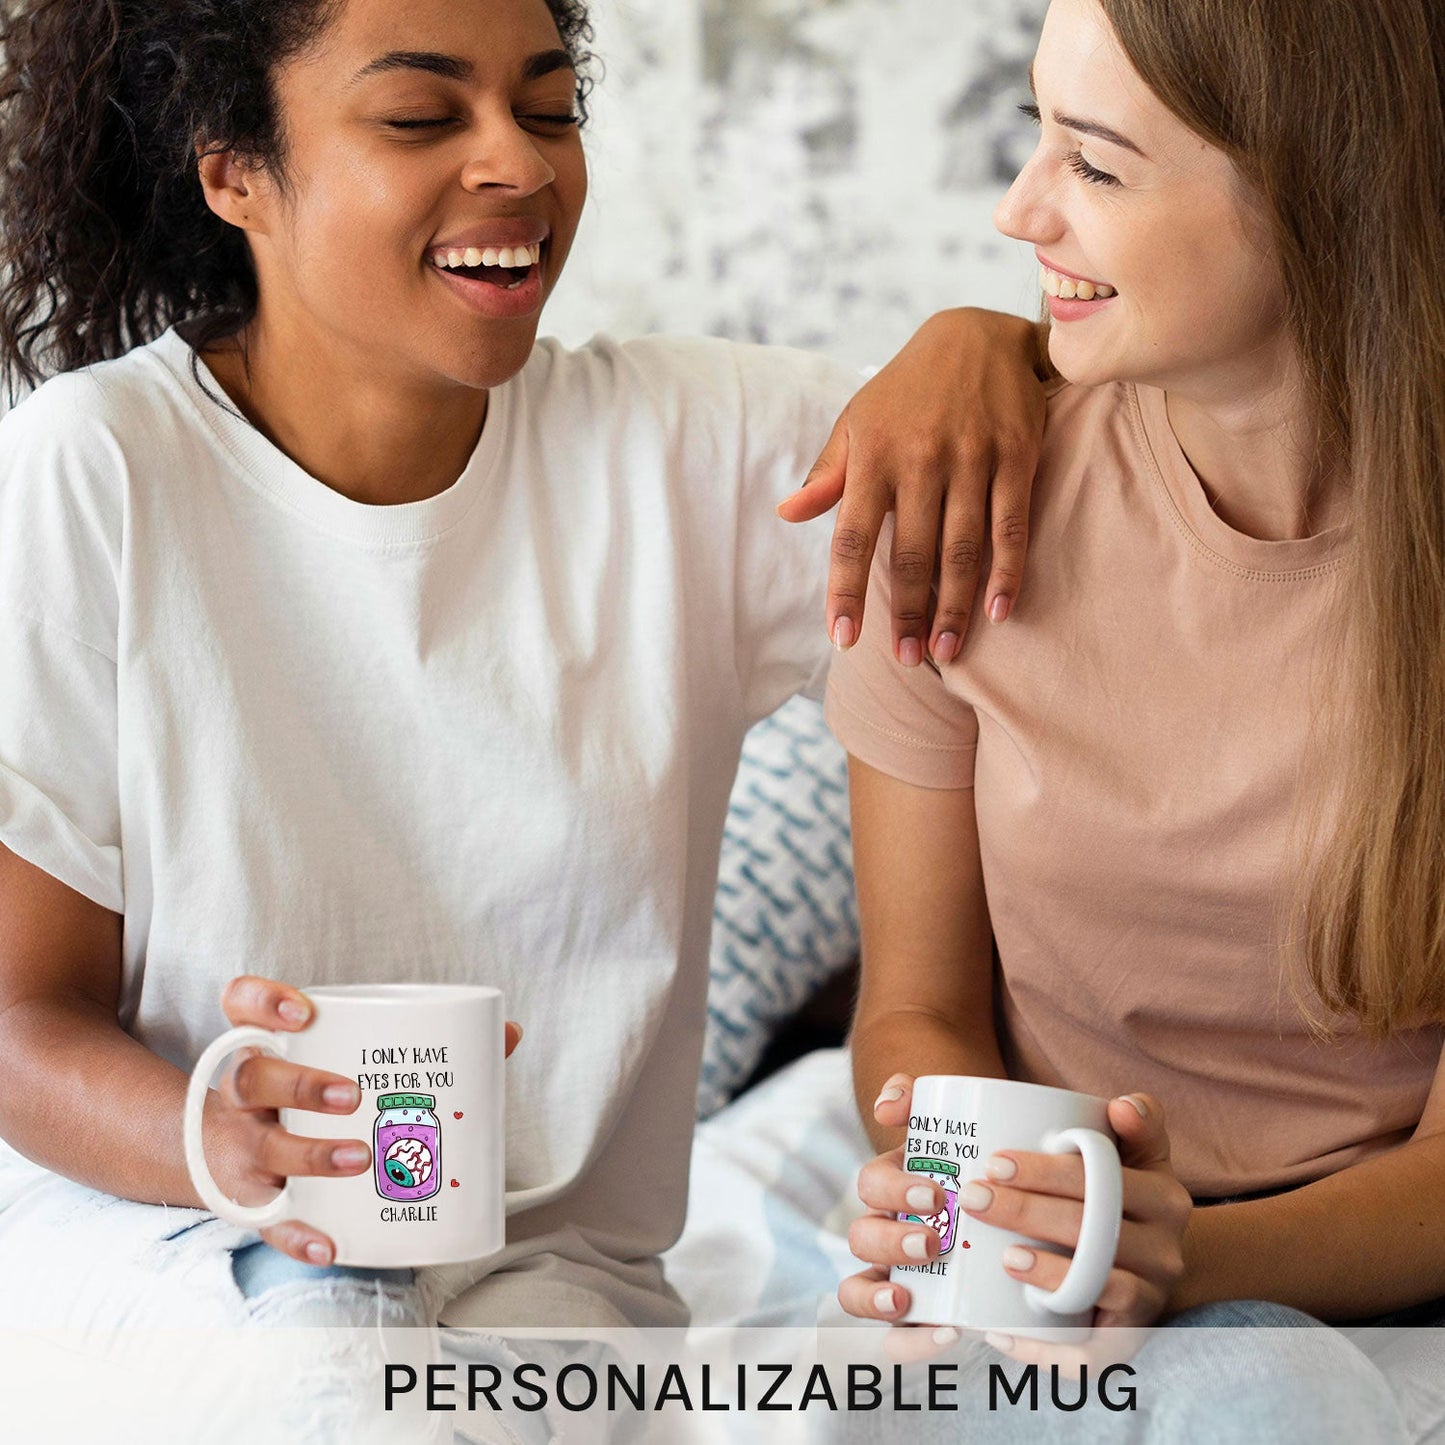 I Only Have Eyes For You - Personalized Anniversary or Halloween gift for Boyfriend or Girlfriend - Custom Mug - MyMindfulGifts